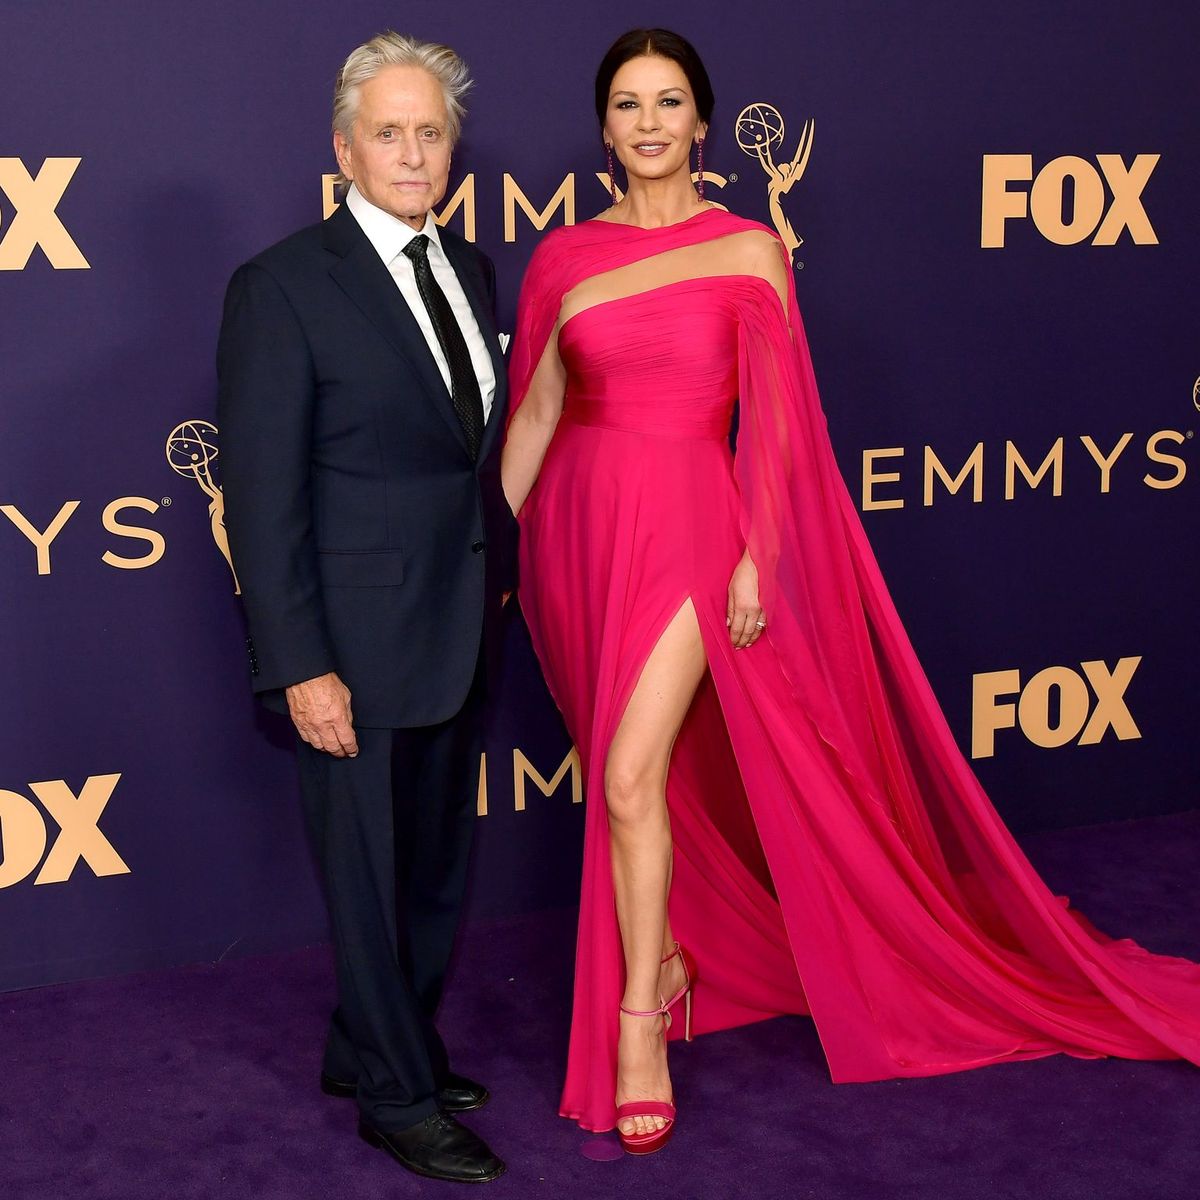  Michael Douglas and Catherine Zeta-Jones attend the 71st Emmy Awards on September 22, 2019. | Getty Images